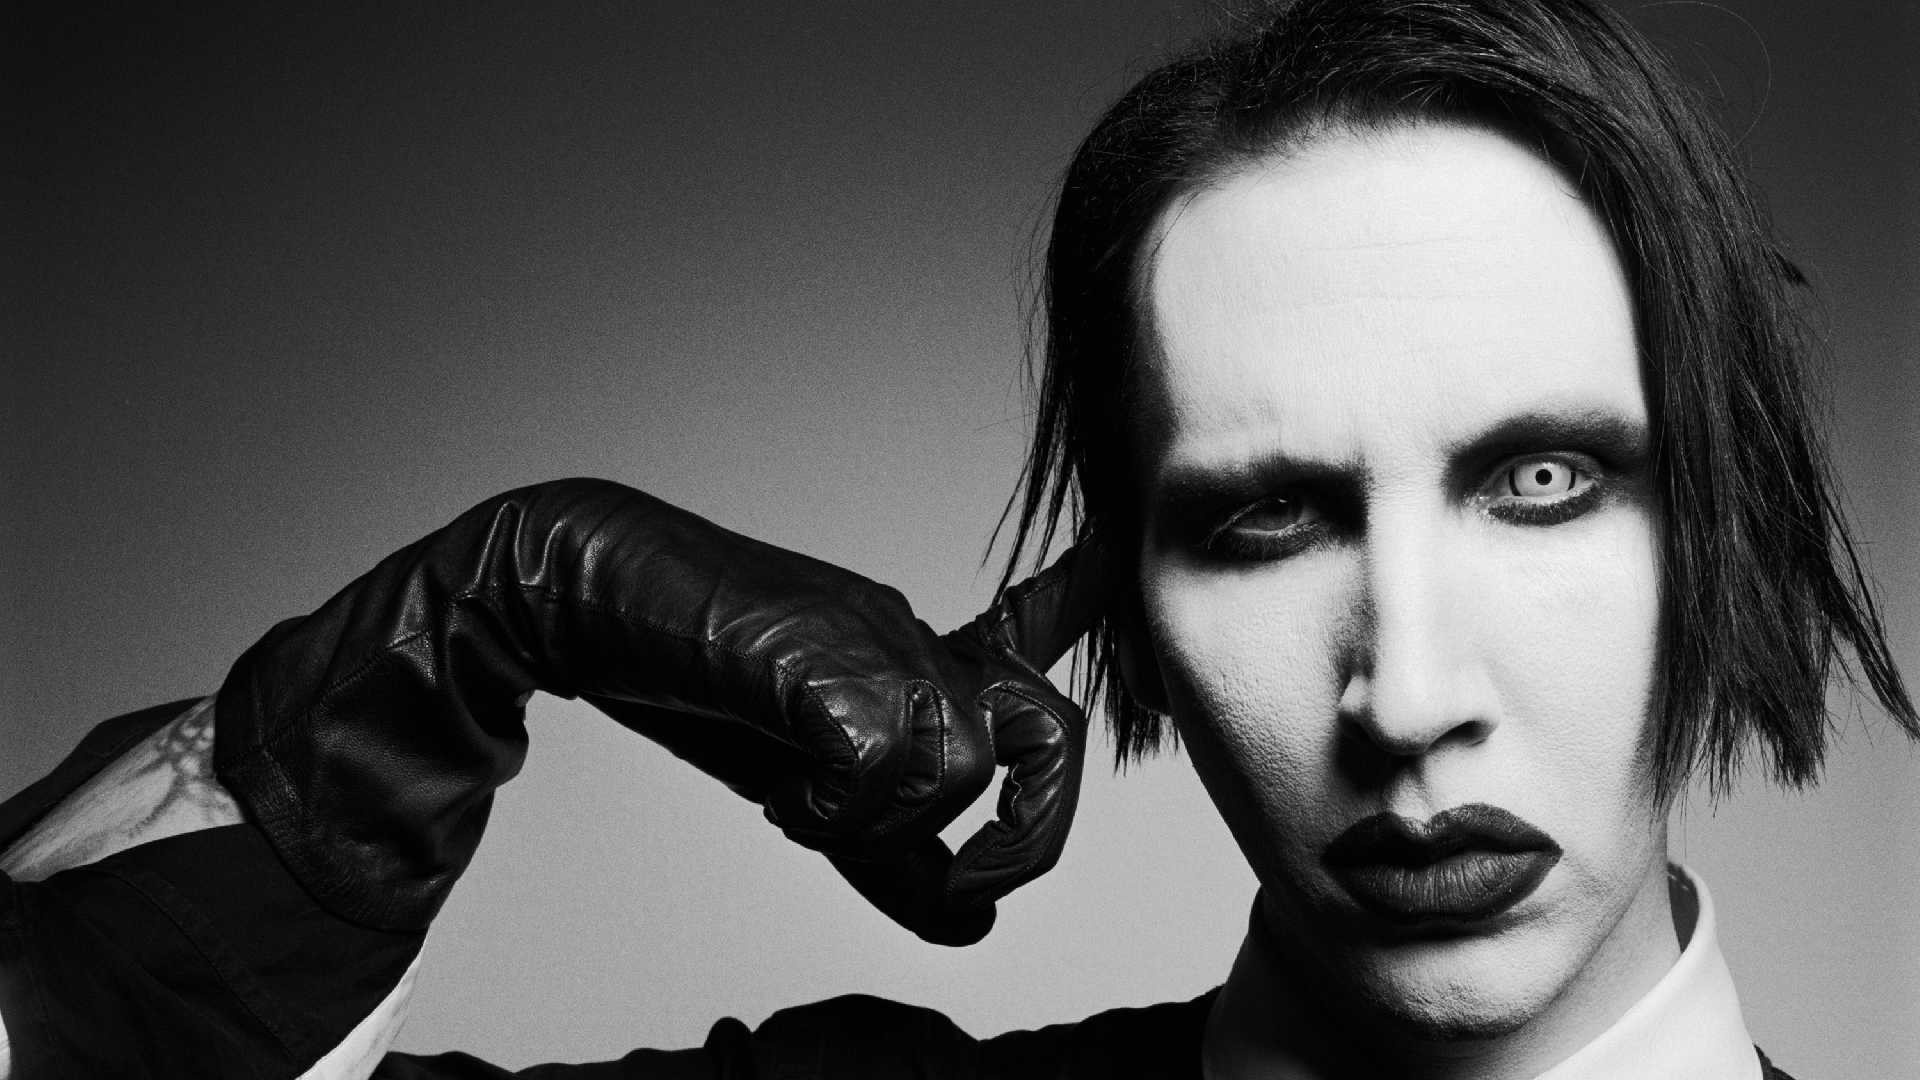 Marilyn Manson, Music wallpapers, High-quality pictures, 4K resolution, 1920x1080 Full HD Desktop